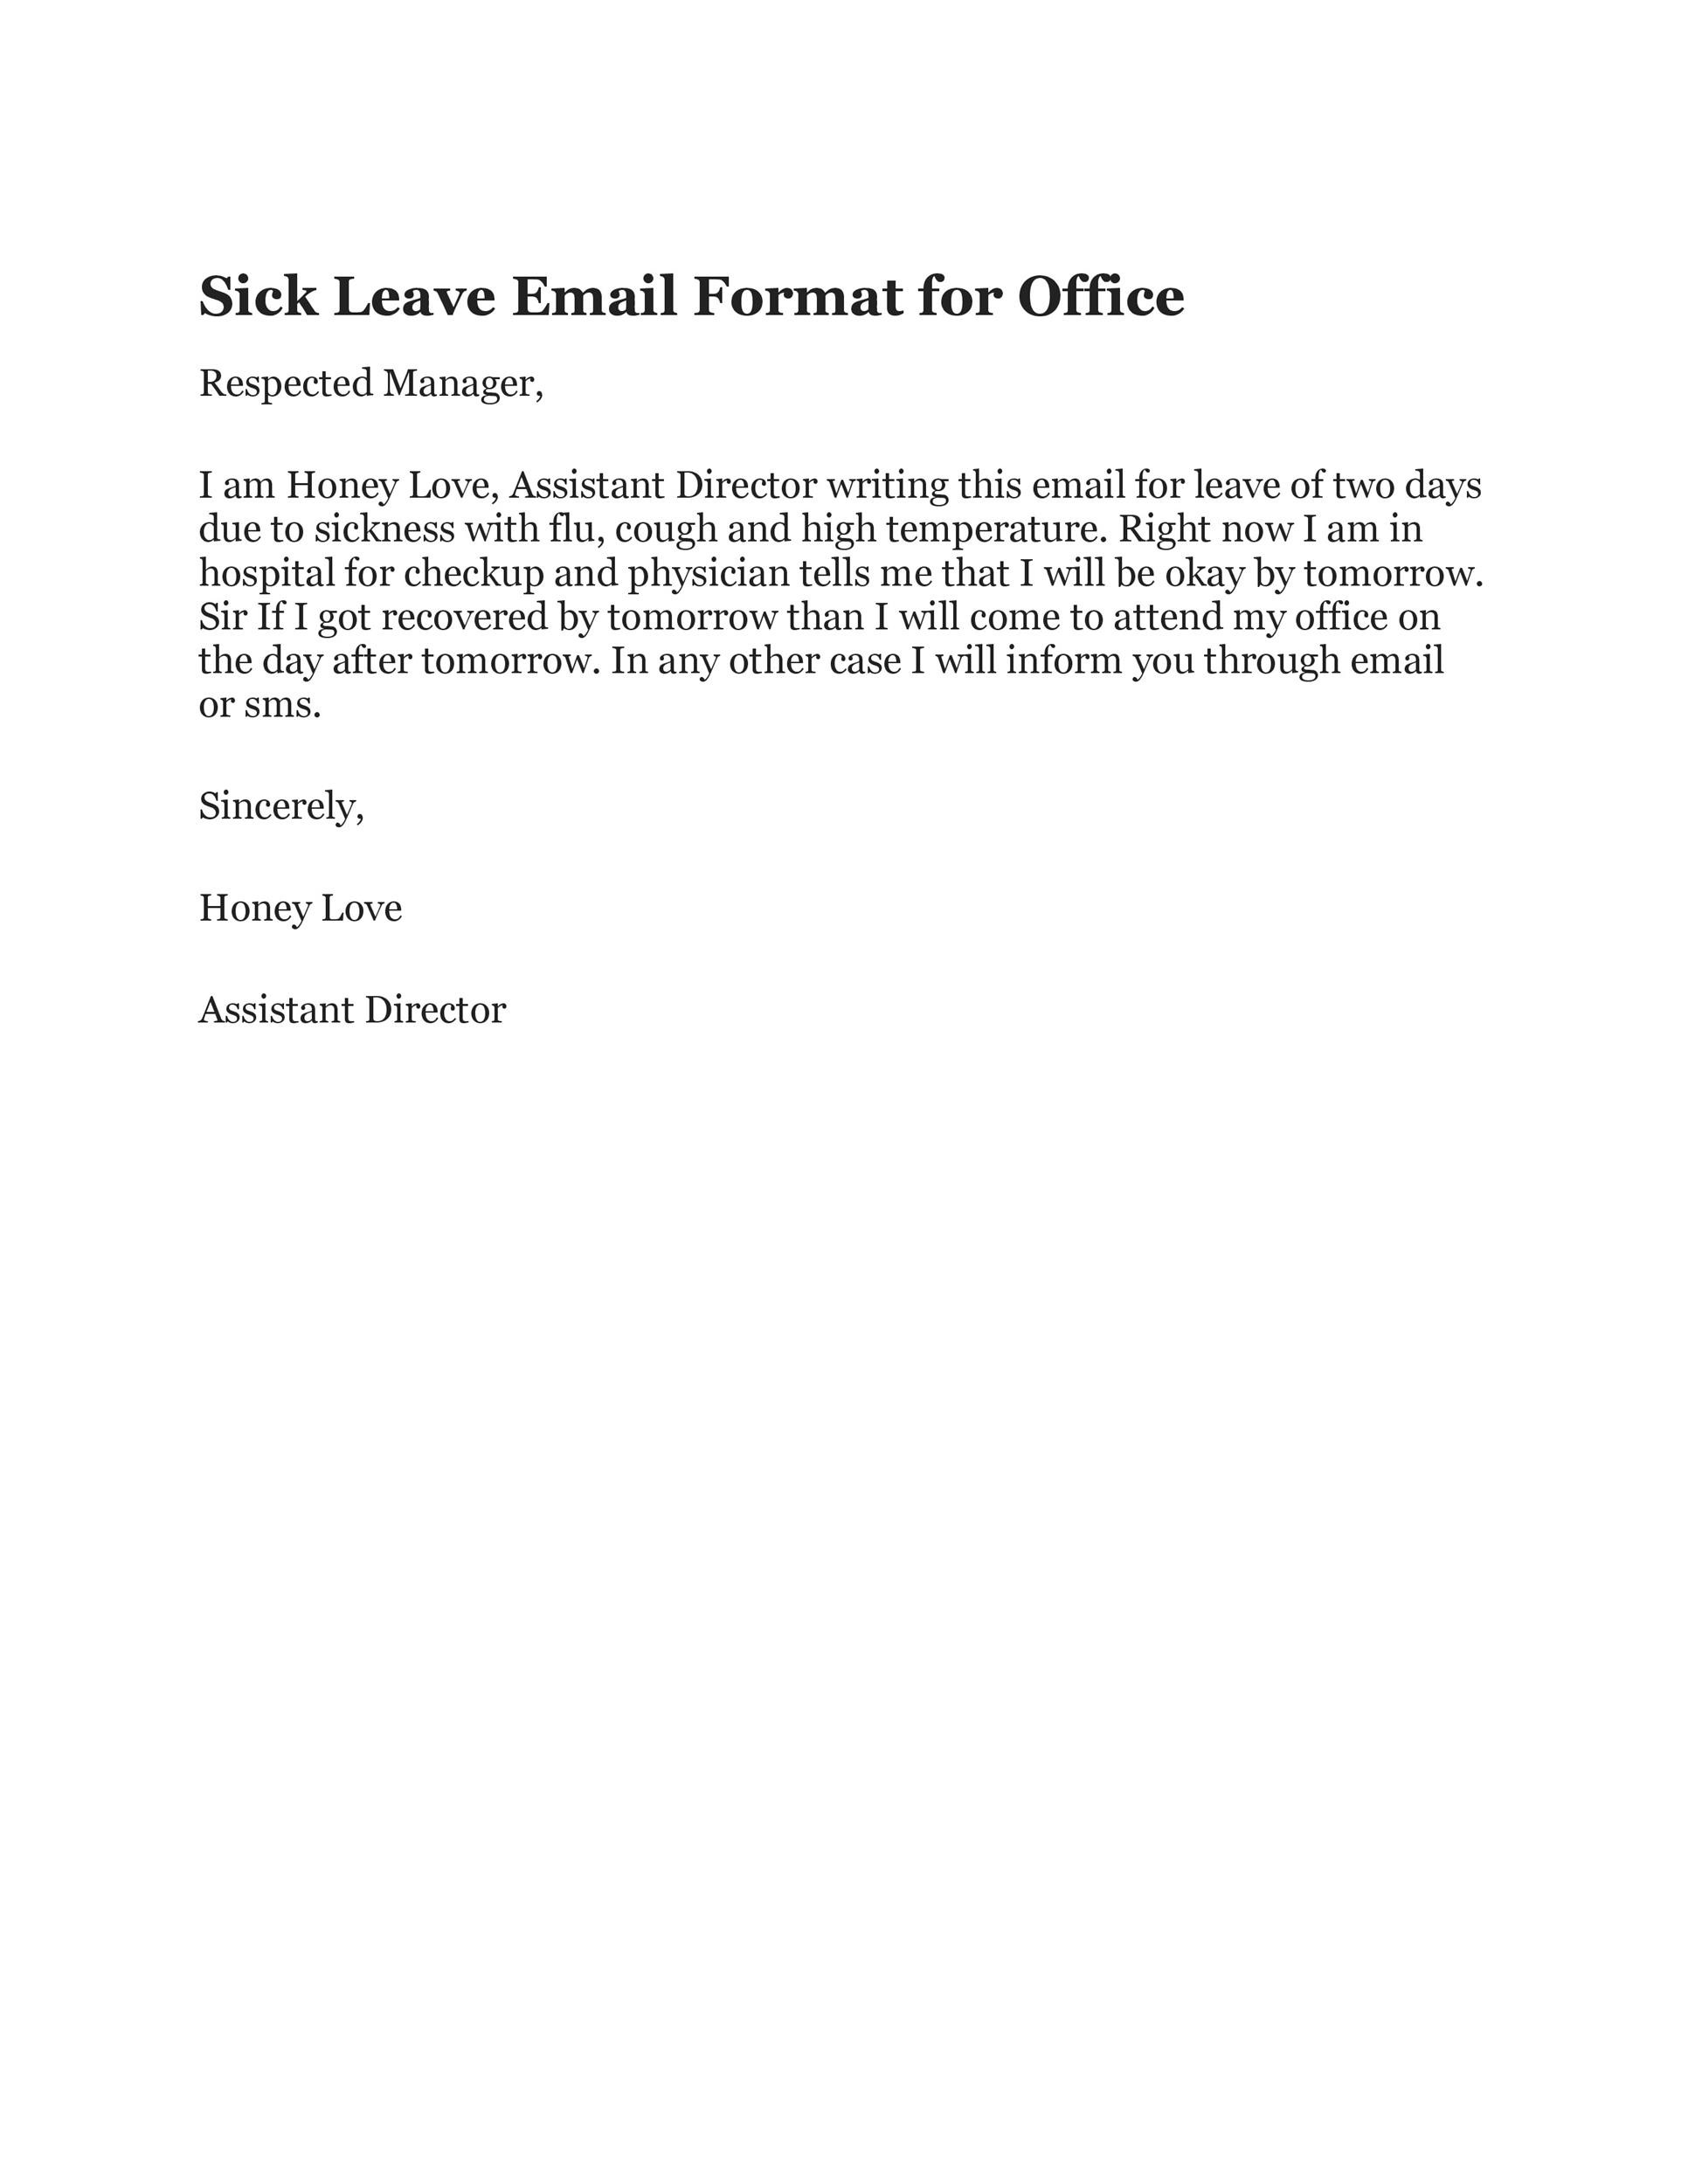 Free sick leave email 36